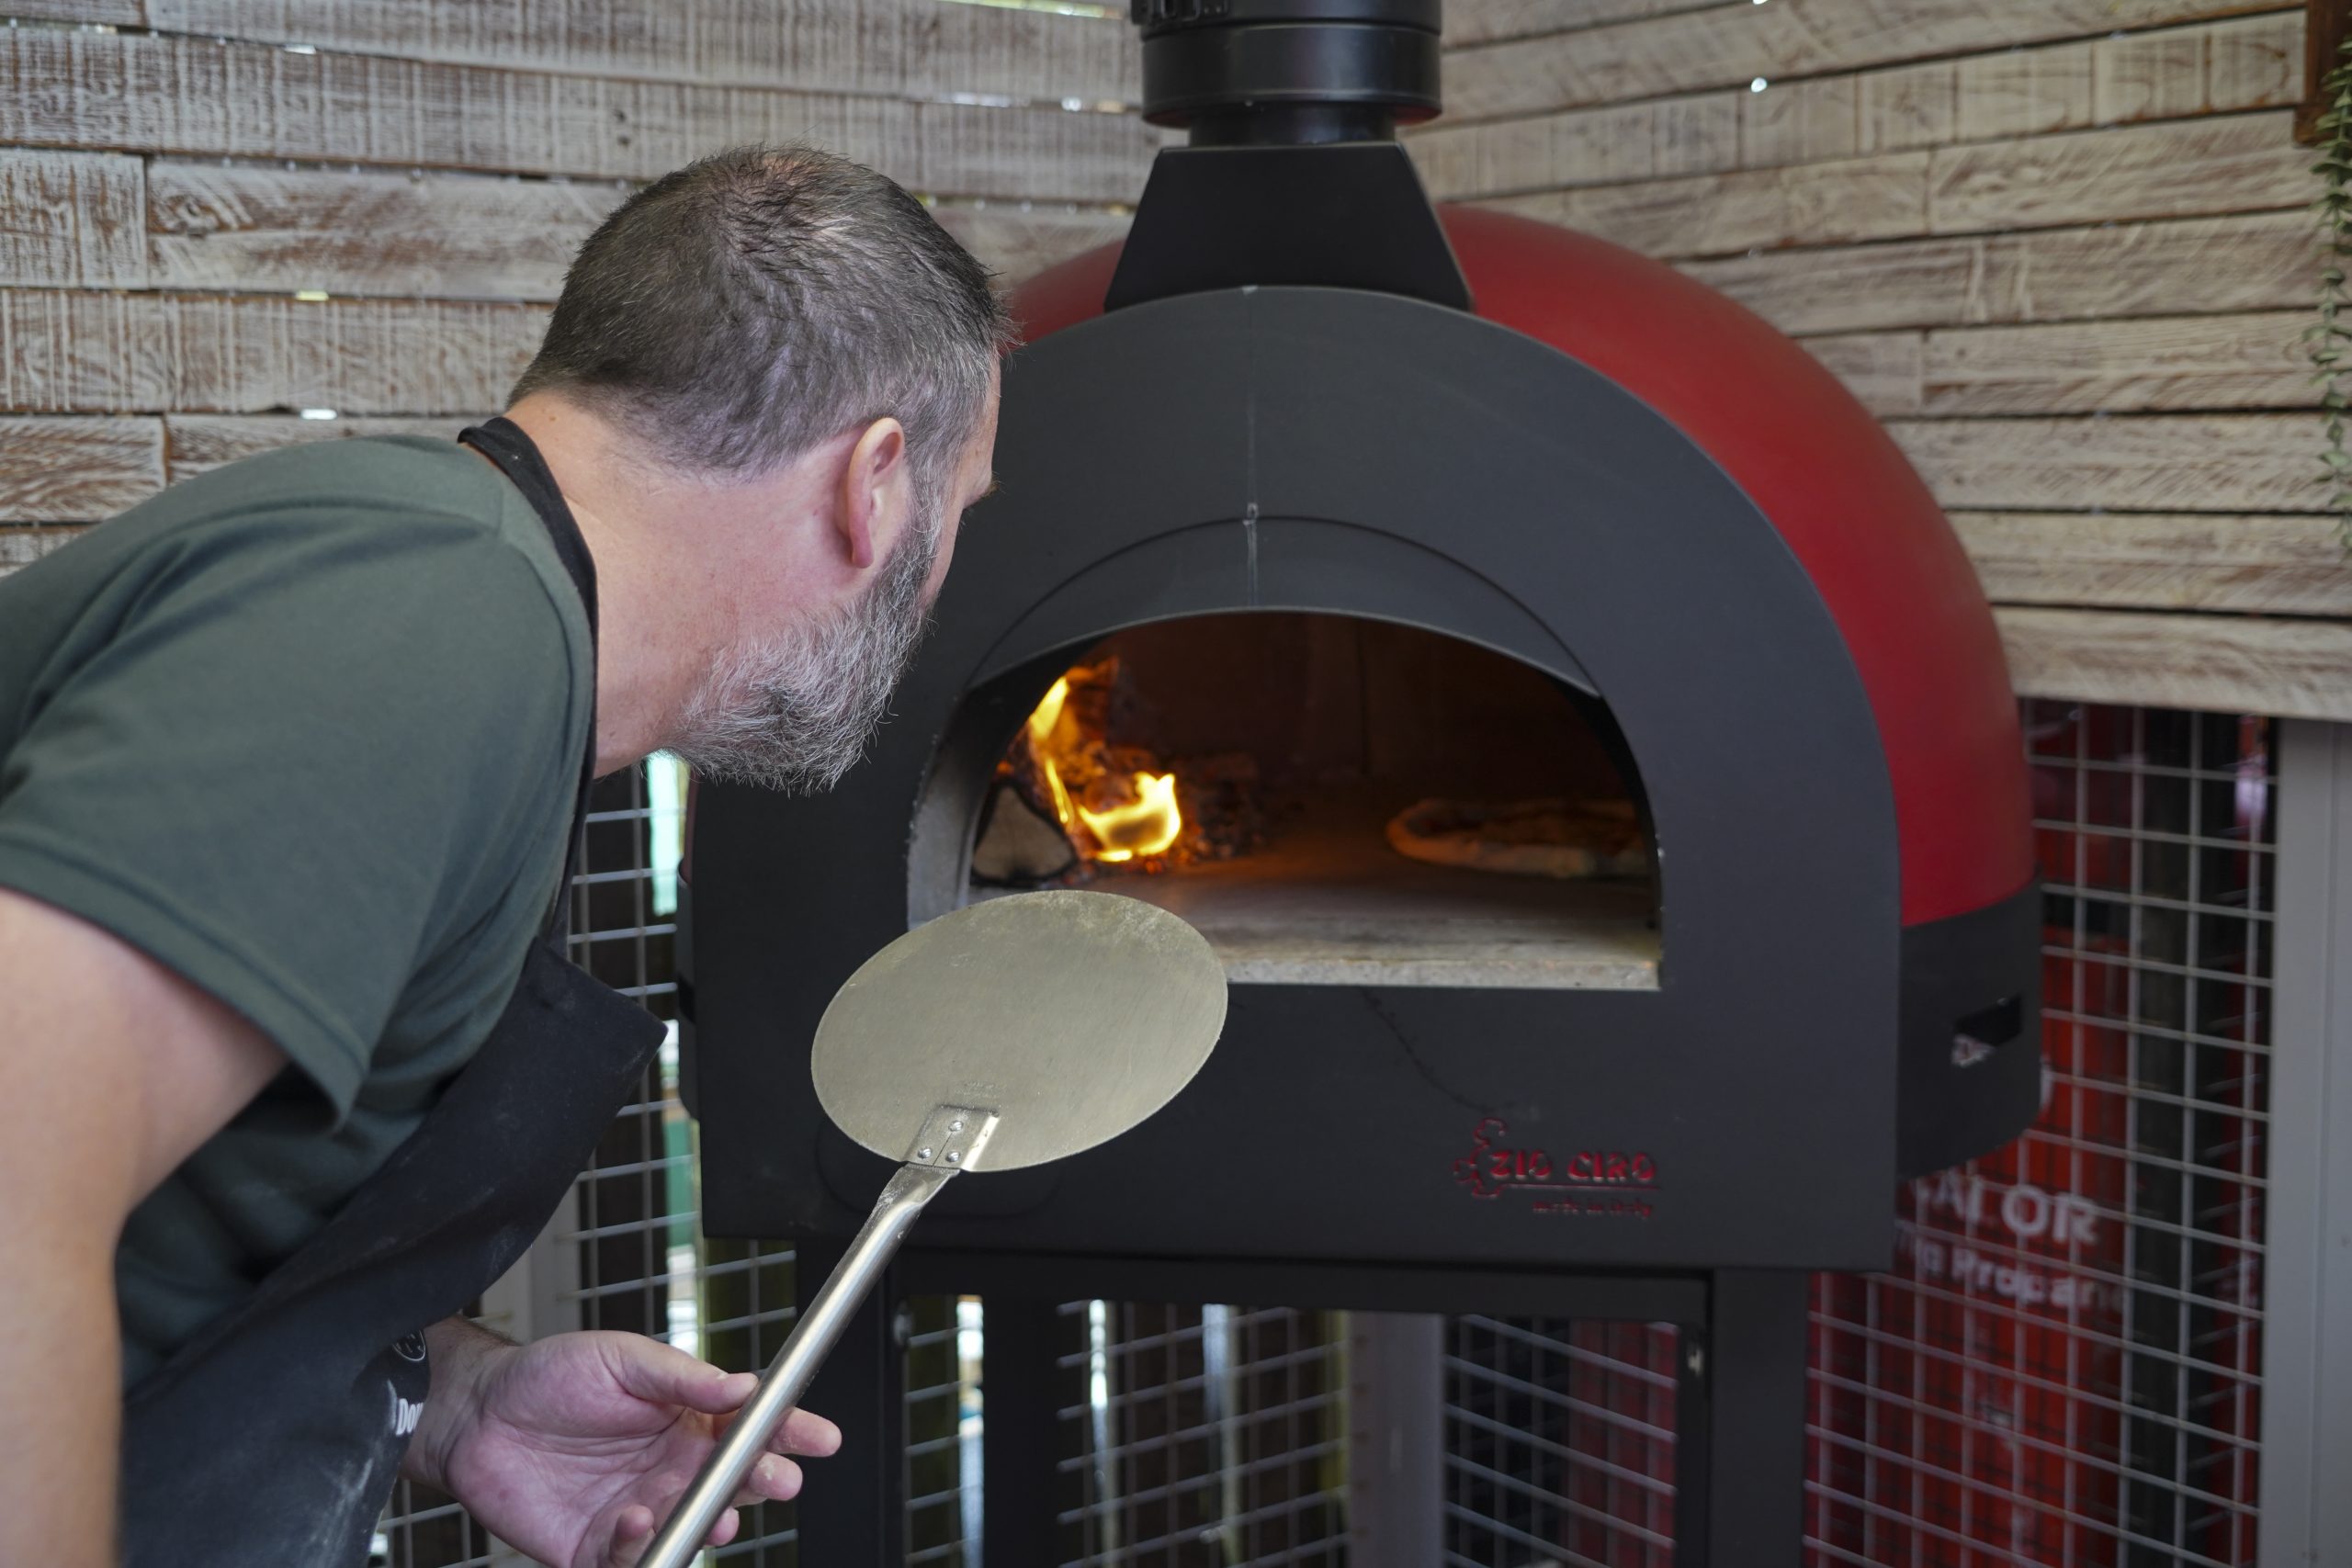 Image from White's Pizza School- man using Zio Ciro oven to cook his pizza holding a Gi Metal Turning Peel.